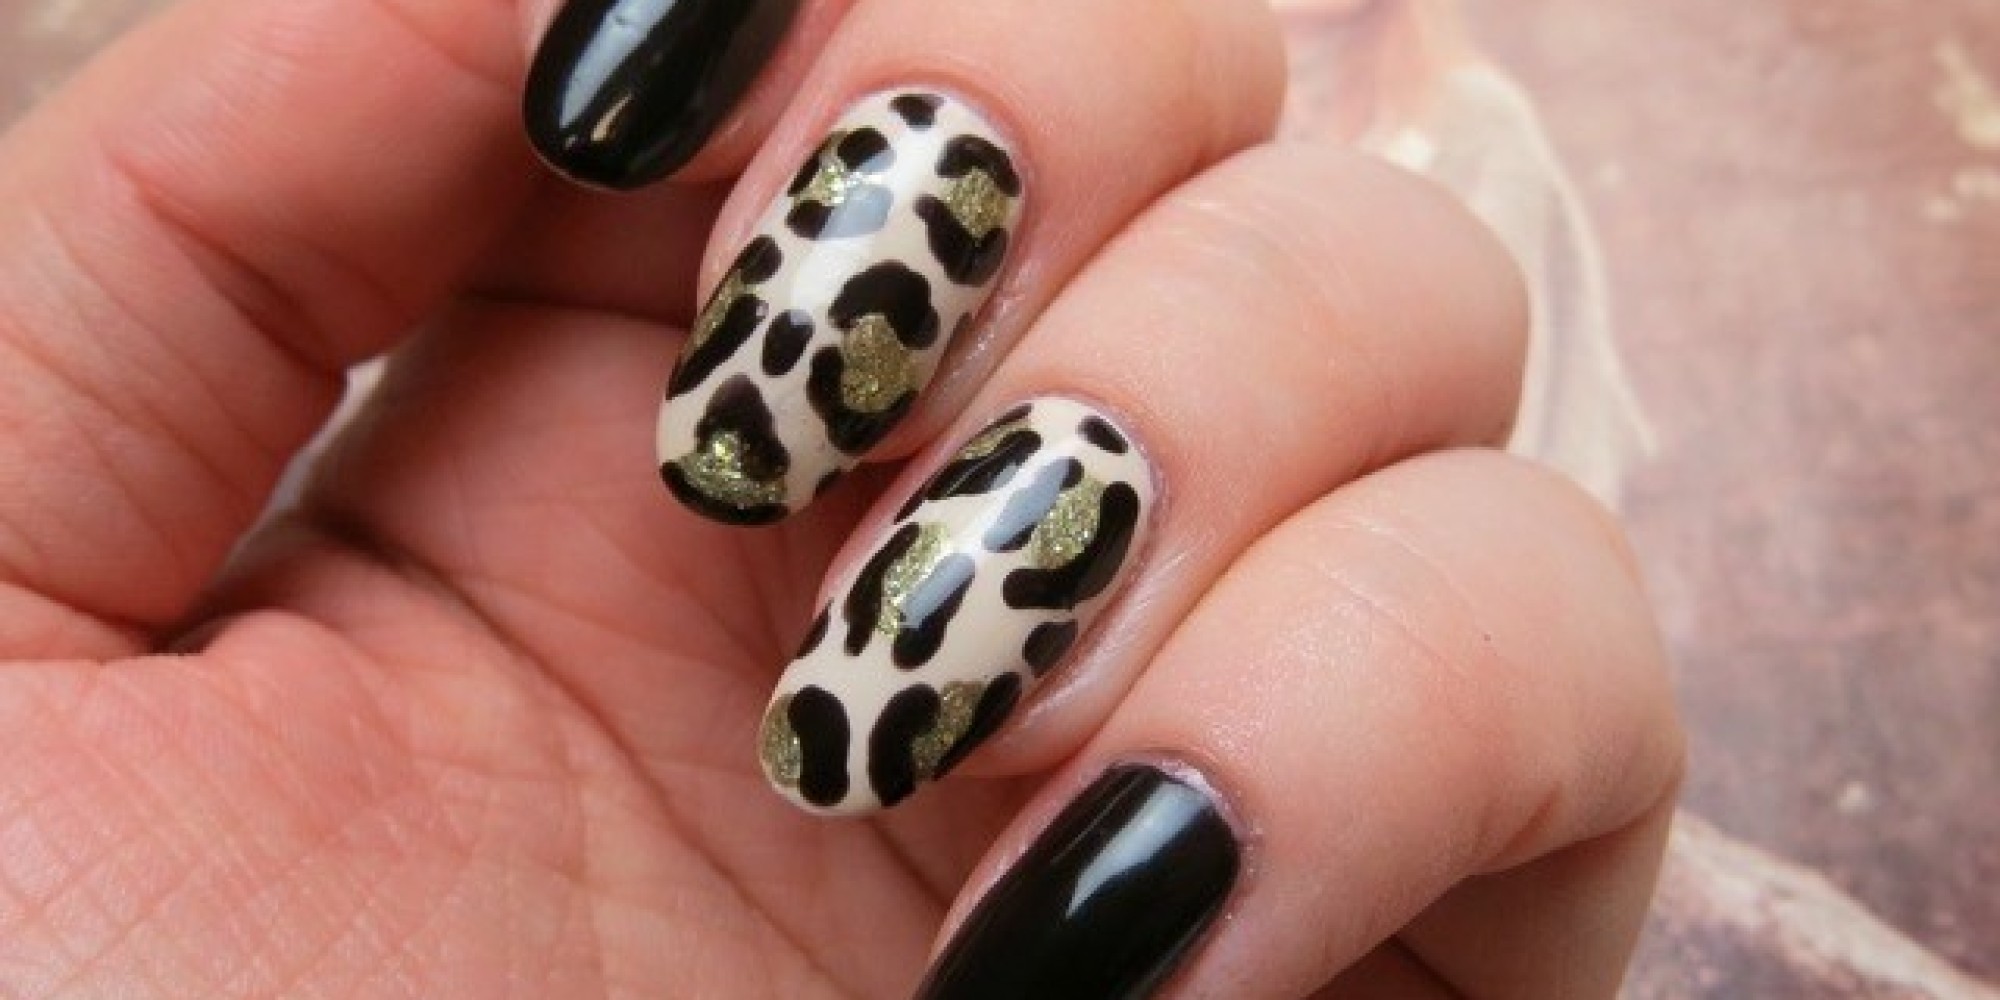 Leopard Print Nail Art Designs for a Wild Look - wide 6